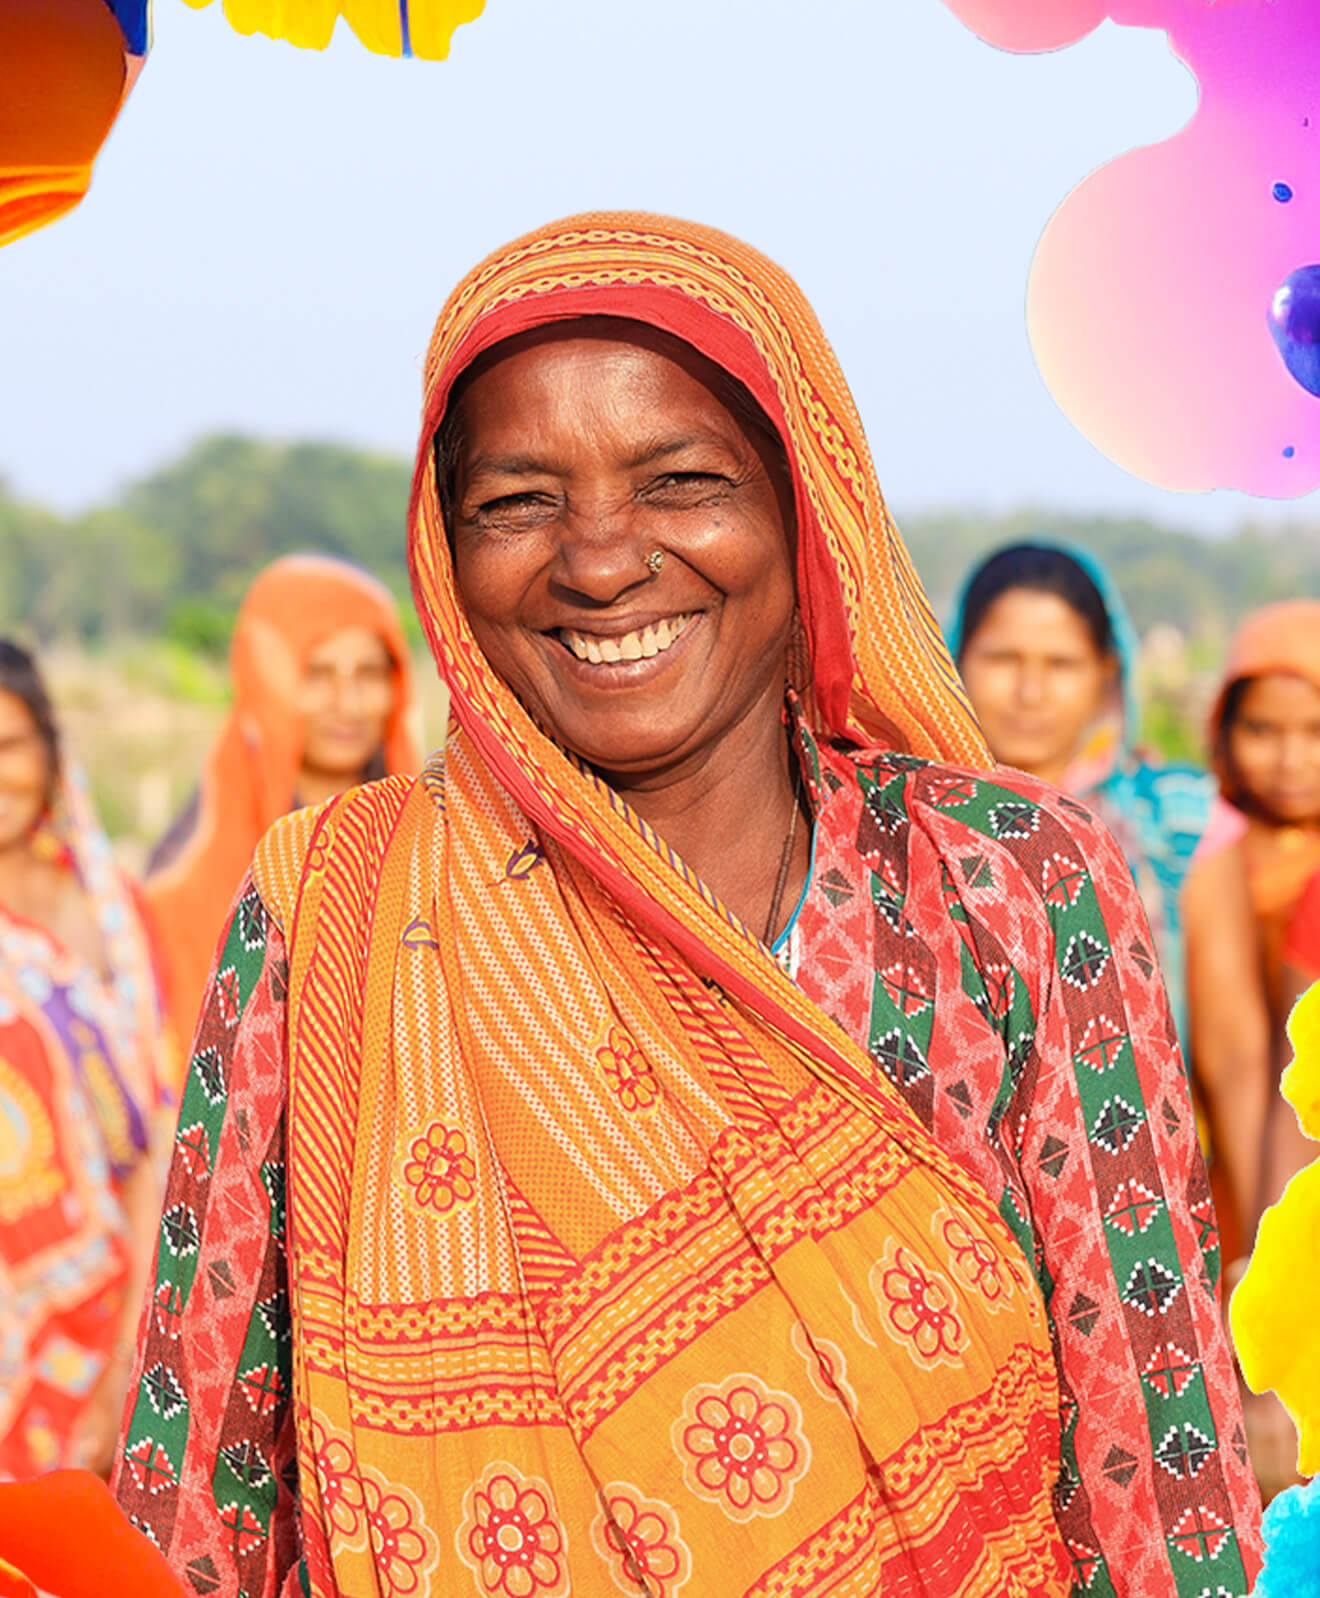 Photo of a smiling Nepalese woman with other women smiling in the background